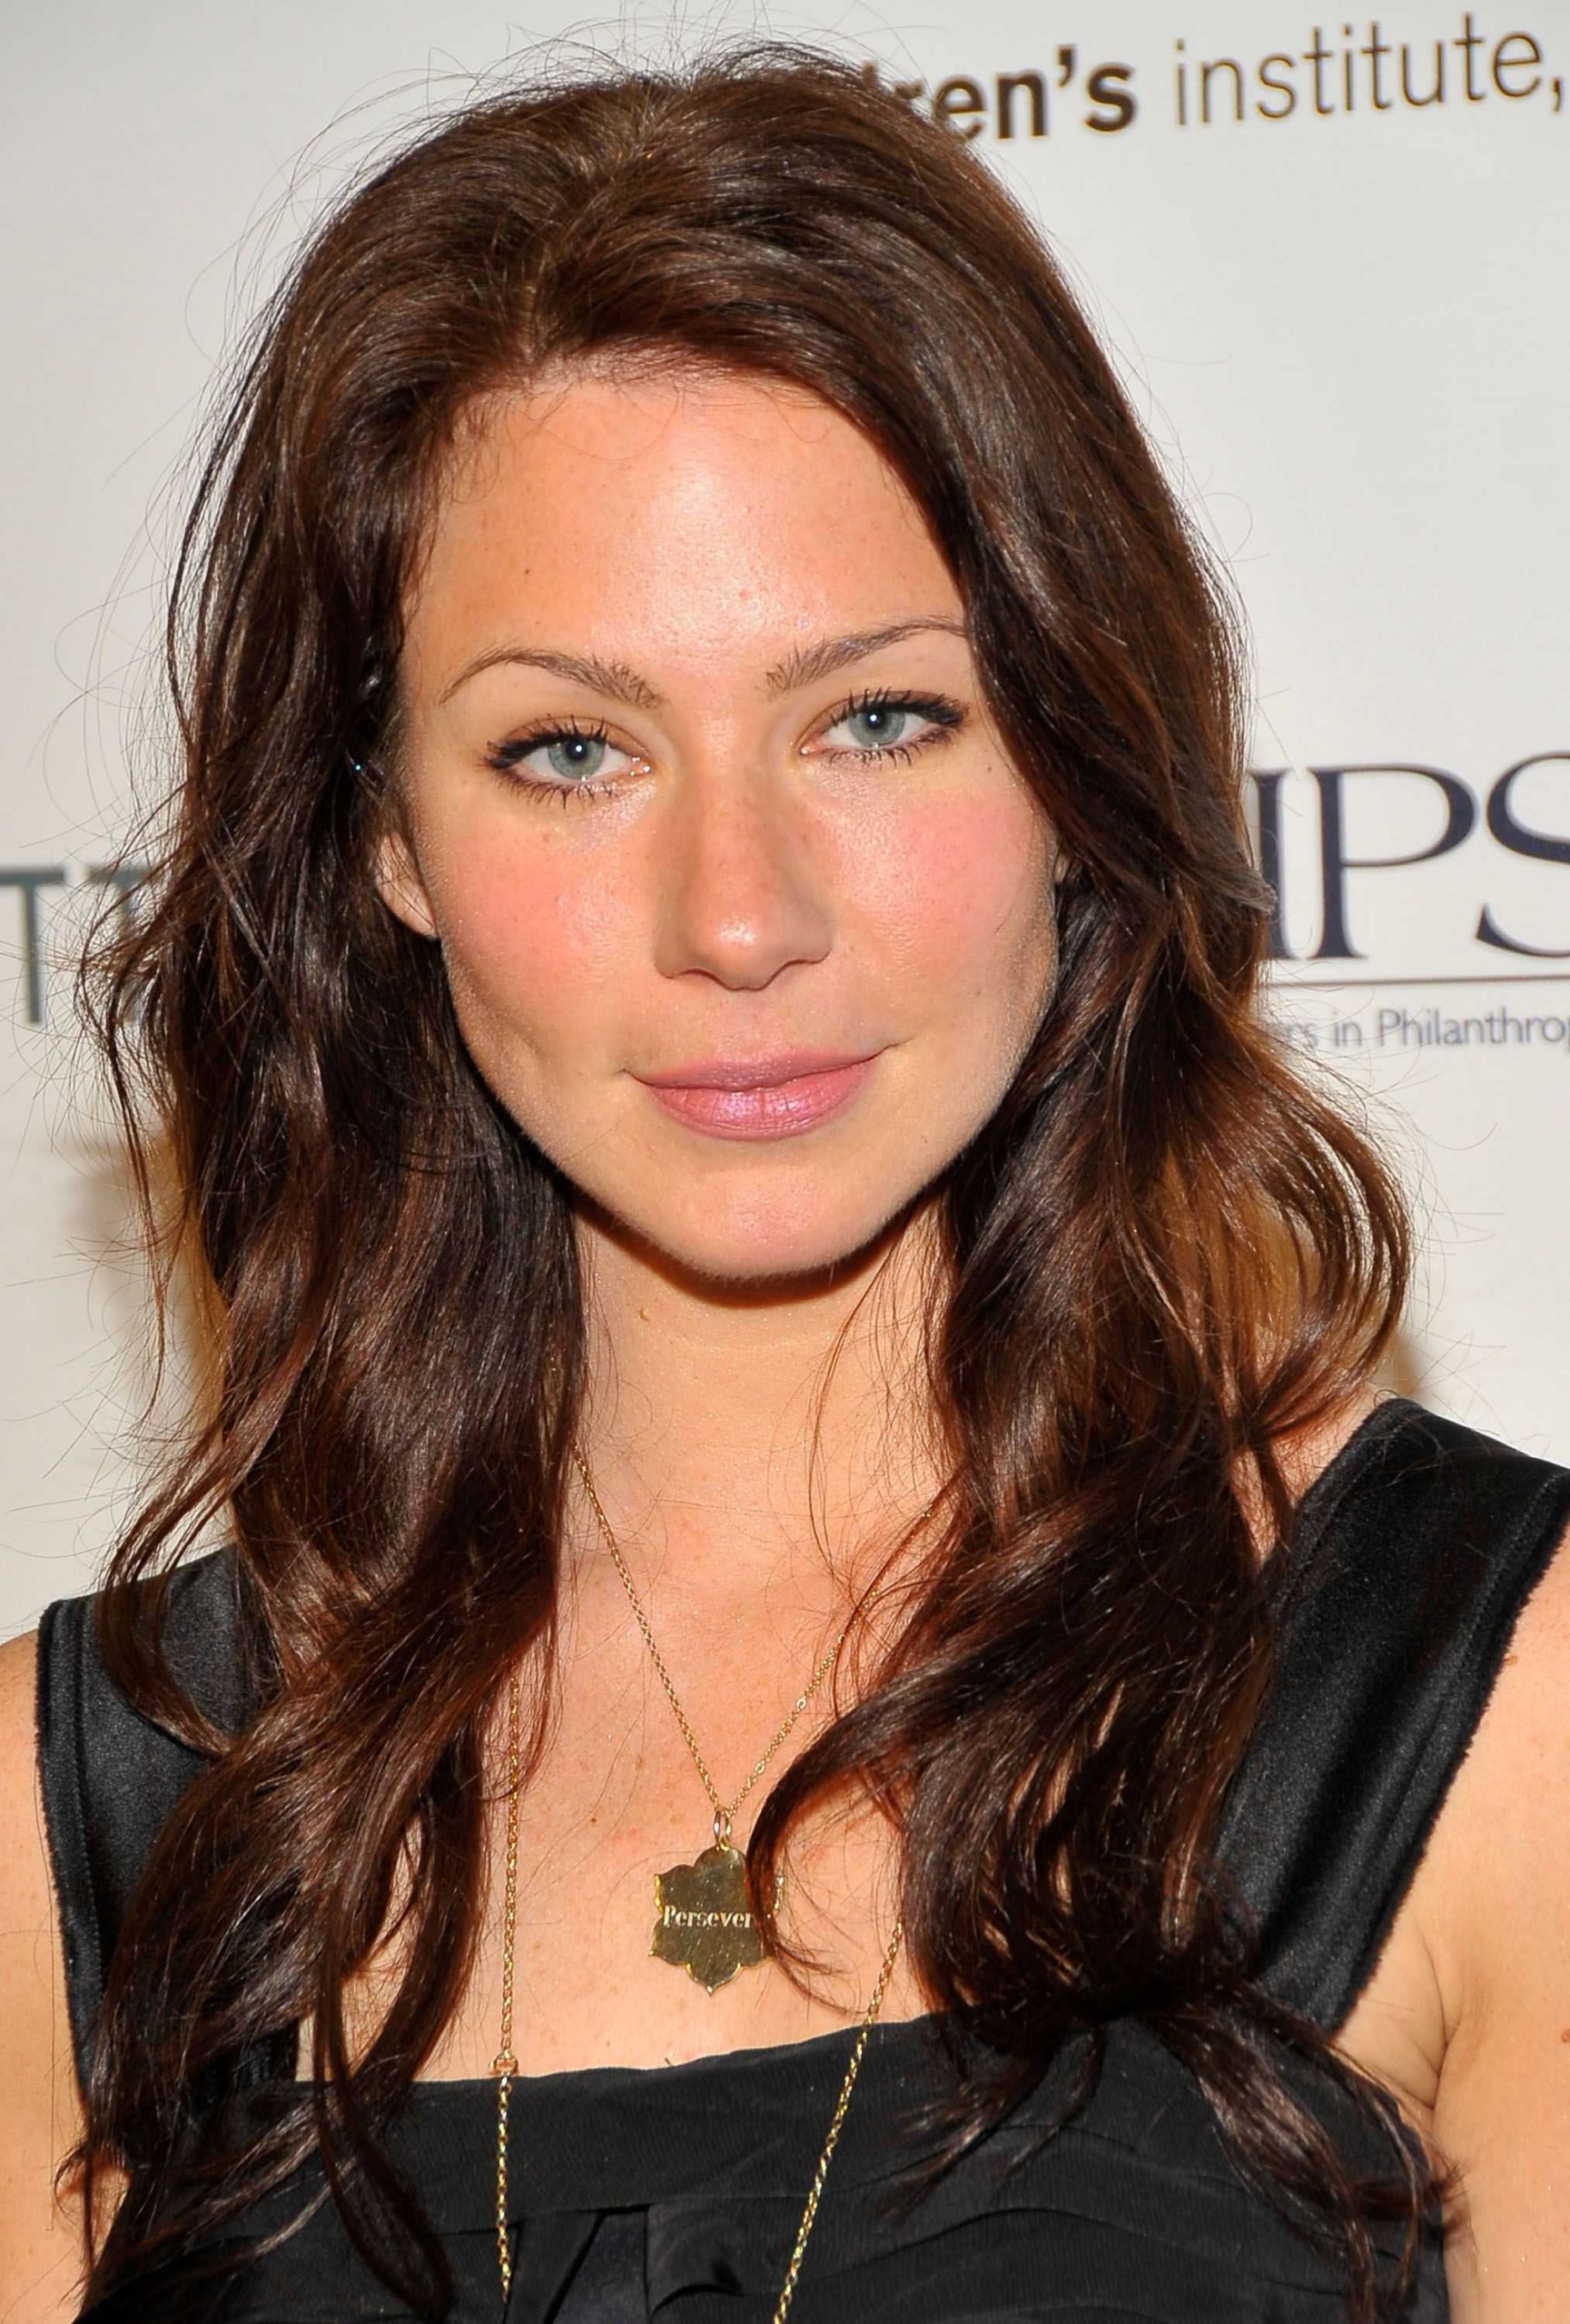 70+ Hot Pictures Of Lynn Collins Expose Her Smokin Hot Body 422